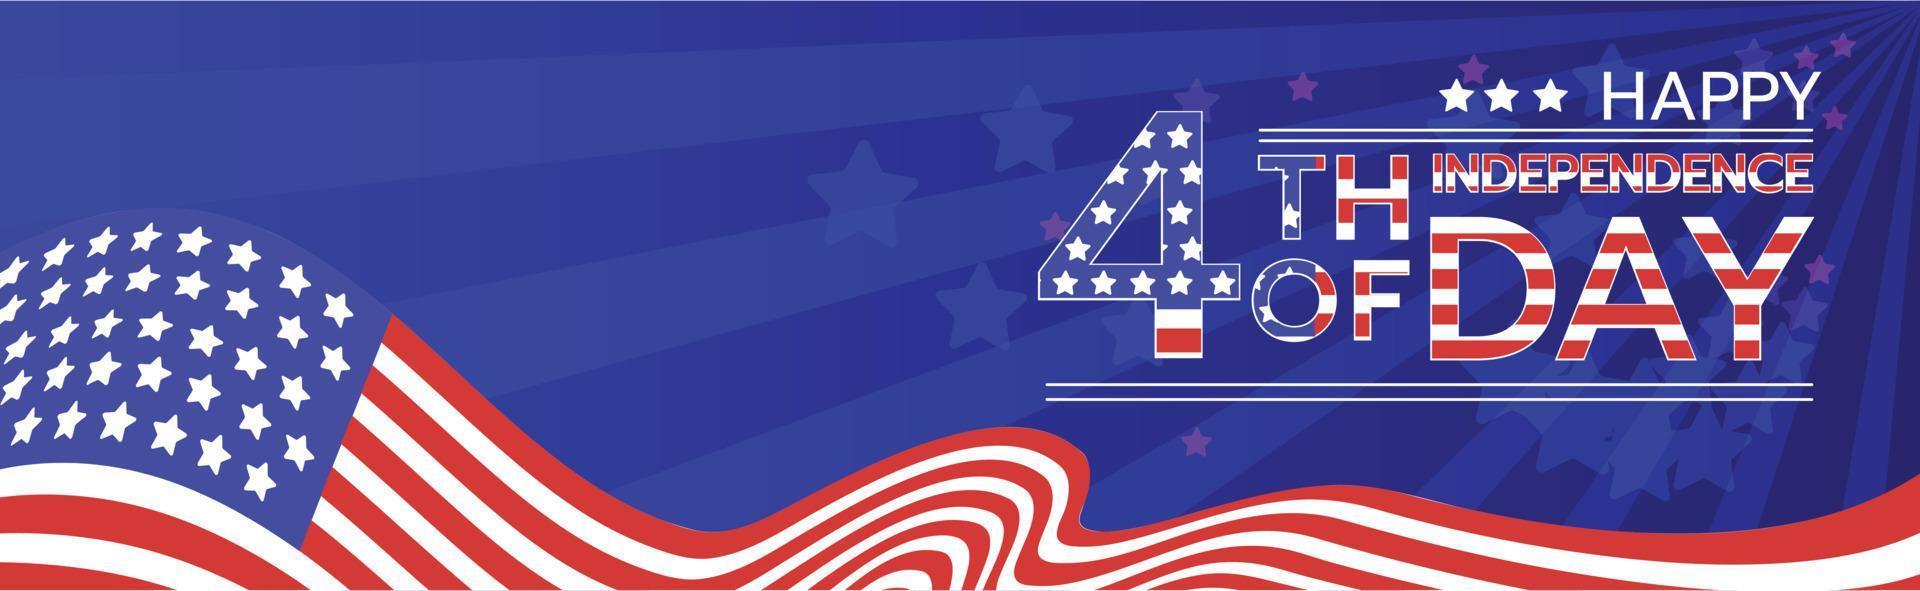 fourth of july happy vector